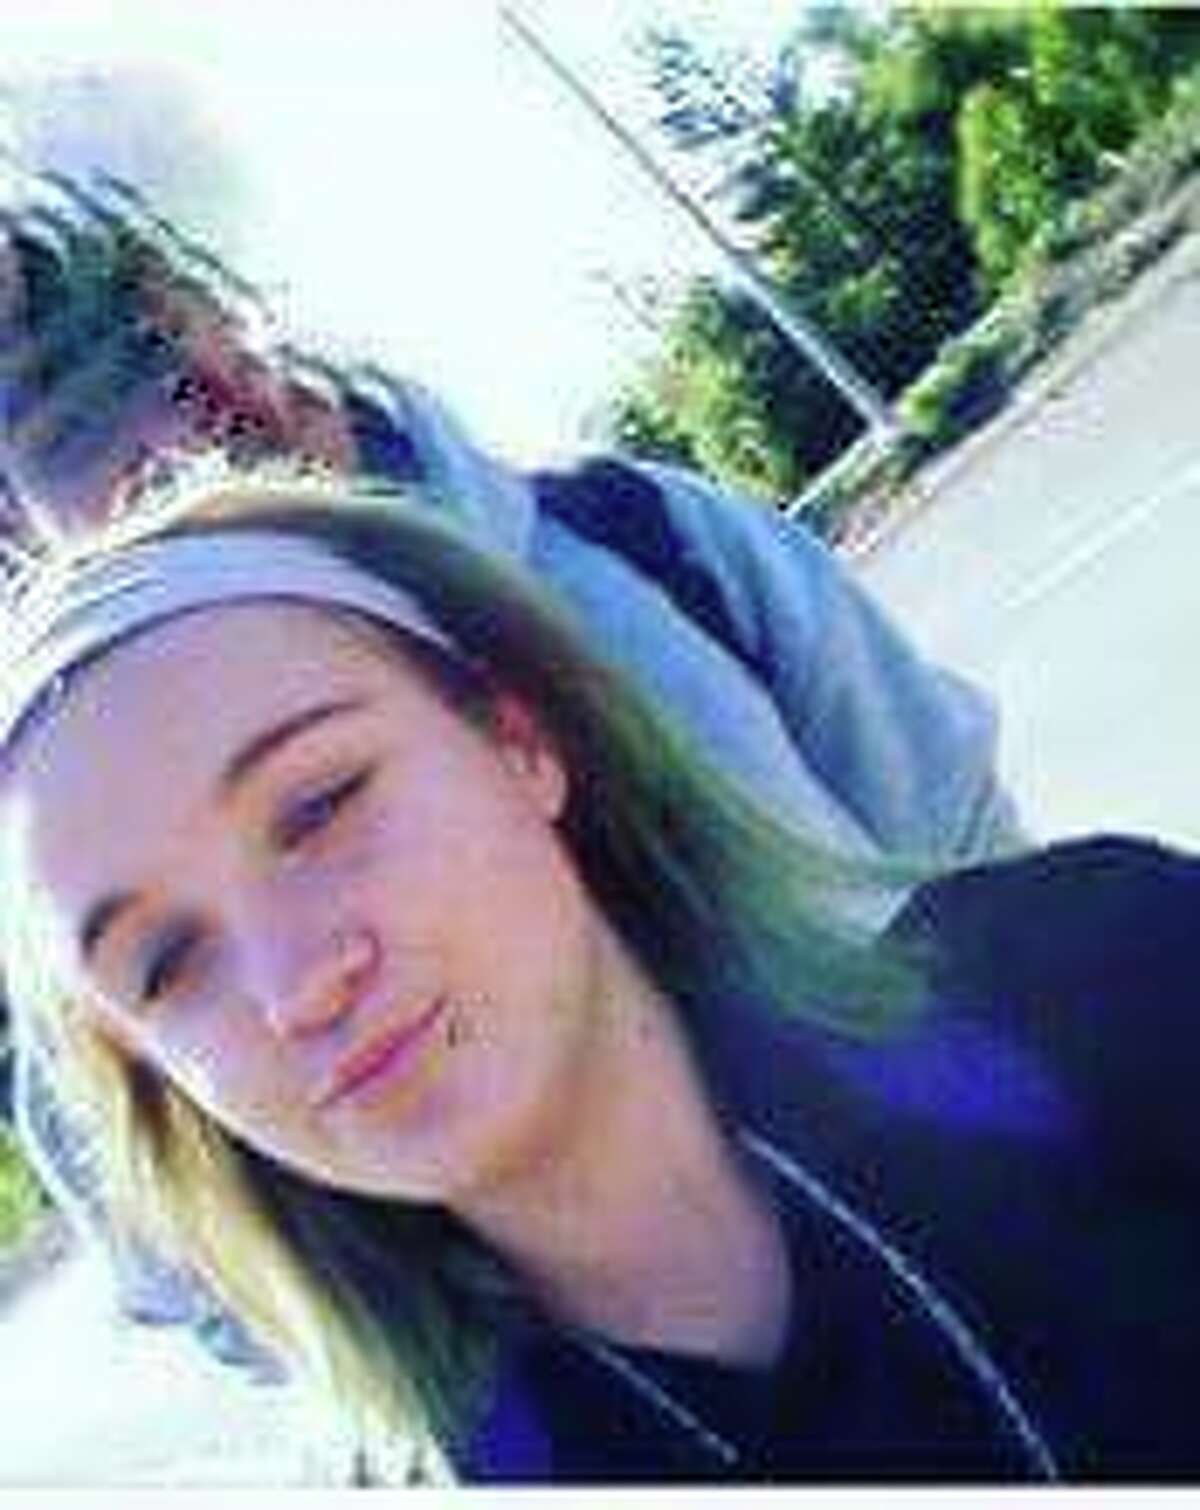 Pearl Pinson, 15, of Vallejo, was last seen around 7 a.m. Wednesday May 25, 2016. Authorities were searching for her and the armed man seen pulling her away, who was identified as 19-year-old Fernando Castro of Vallejo.